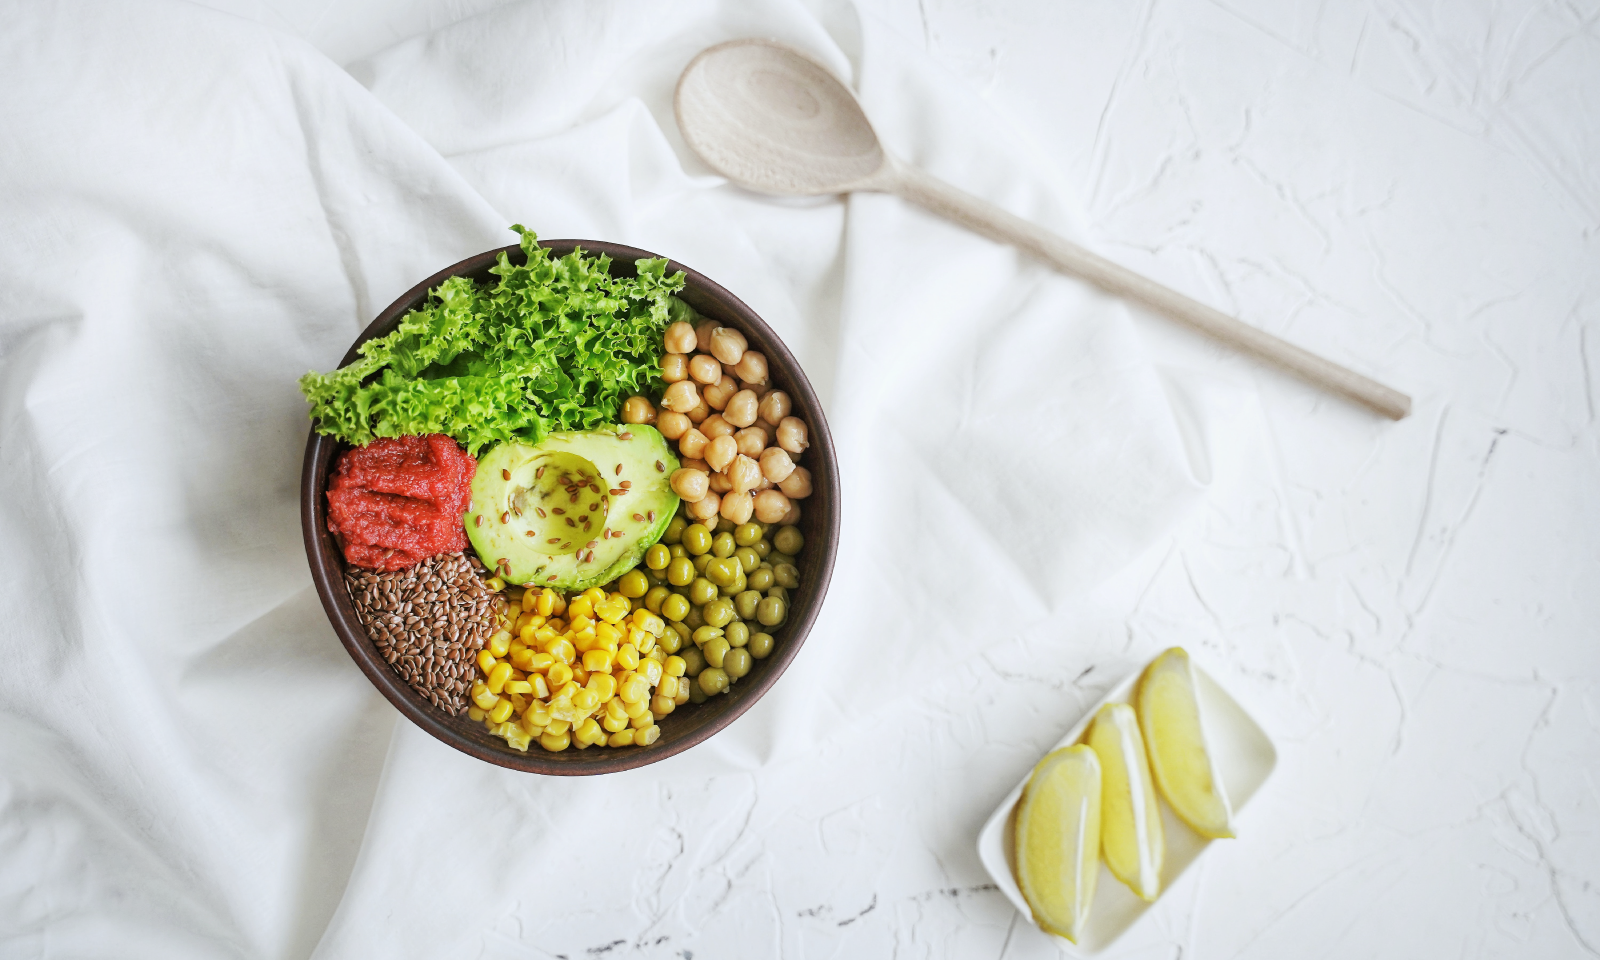 A ceramic bowl filled with healthy food, including grains, legumes, leafy greens and half an avocado.